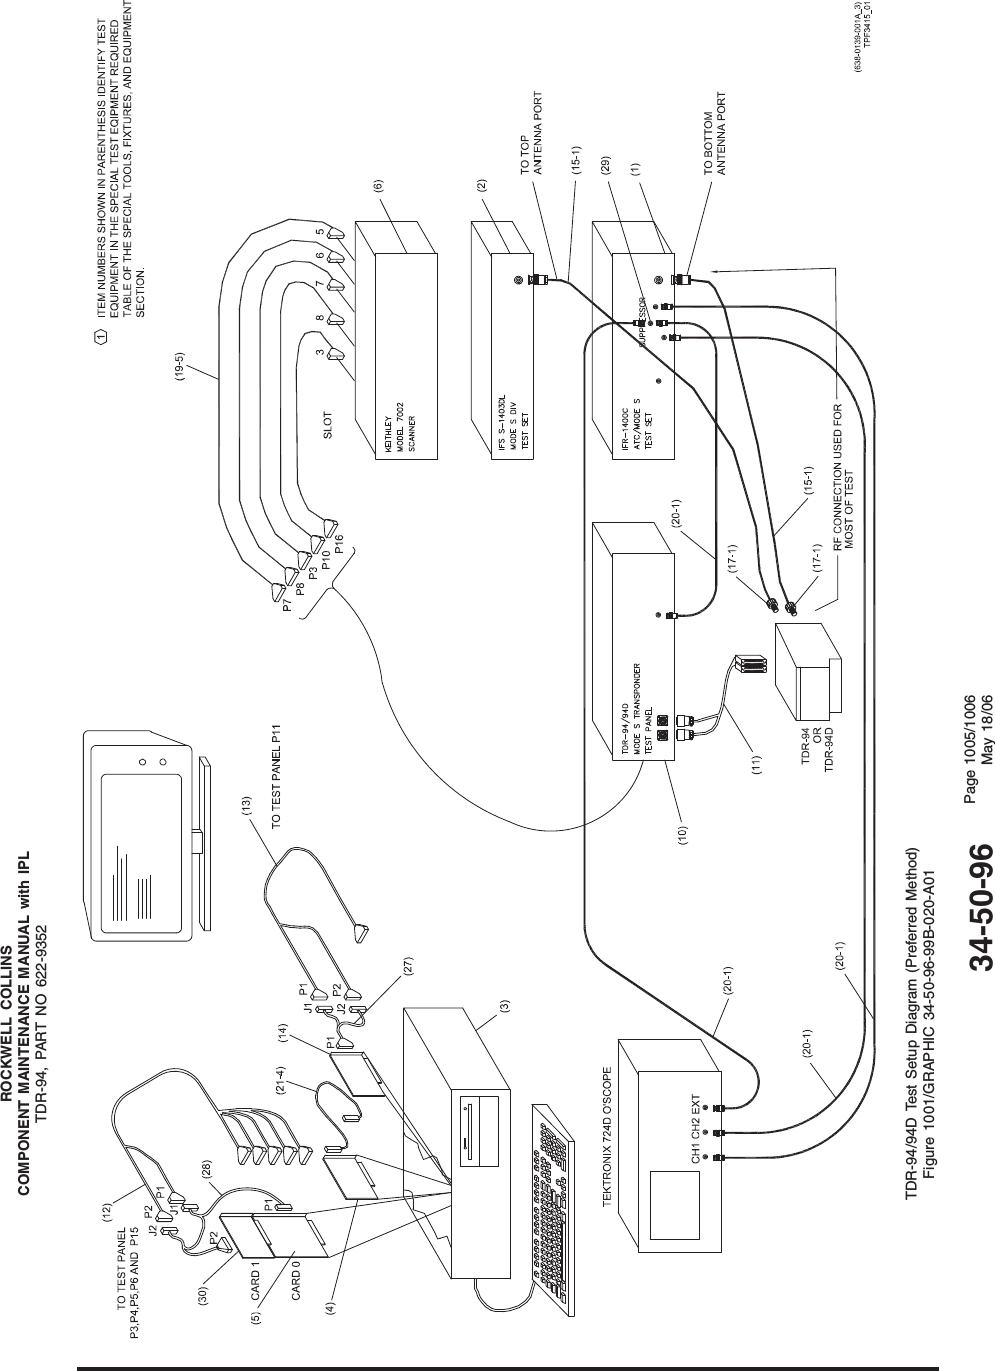 ROCKWELL COLLINSCOMPONENT MAINTENANCE MANUAL with IPLTDR-94, PART NO 622-9352TDR-94/94D Test Setup Diagram (Preferred Method)Figure 1001/GRAPHIC 34-50-96-99B-020-A0134-50-96 Page 1005/1006May 18/06